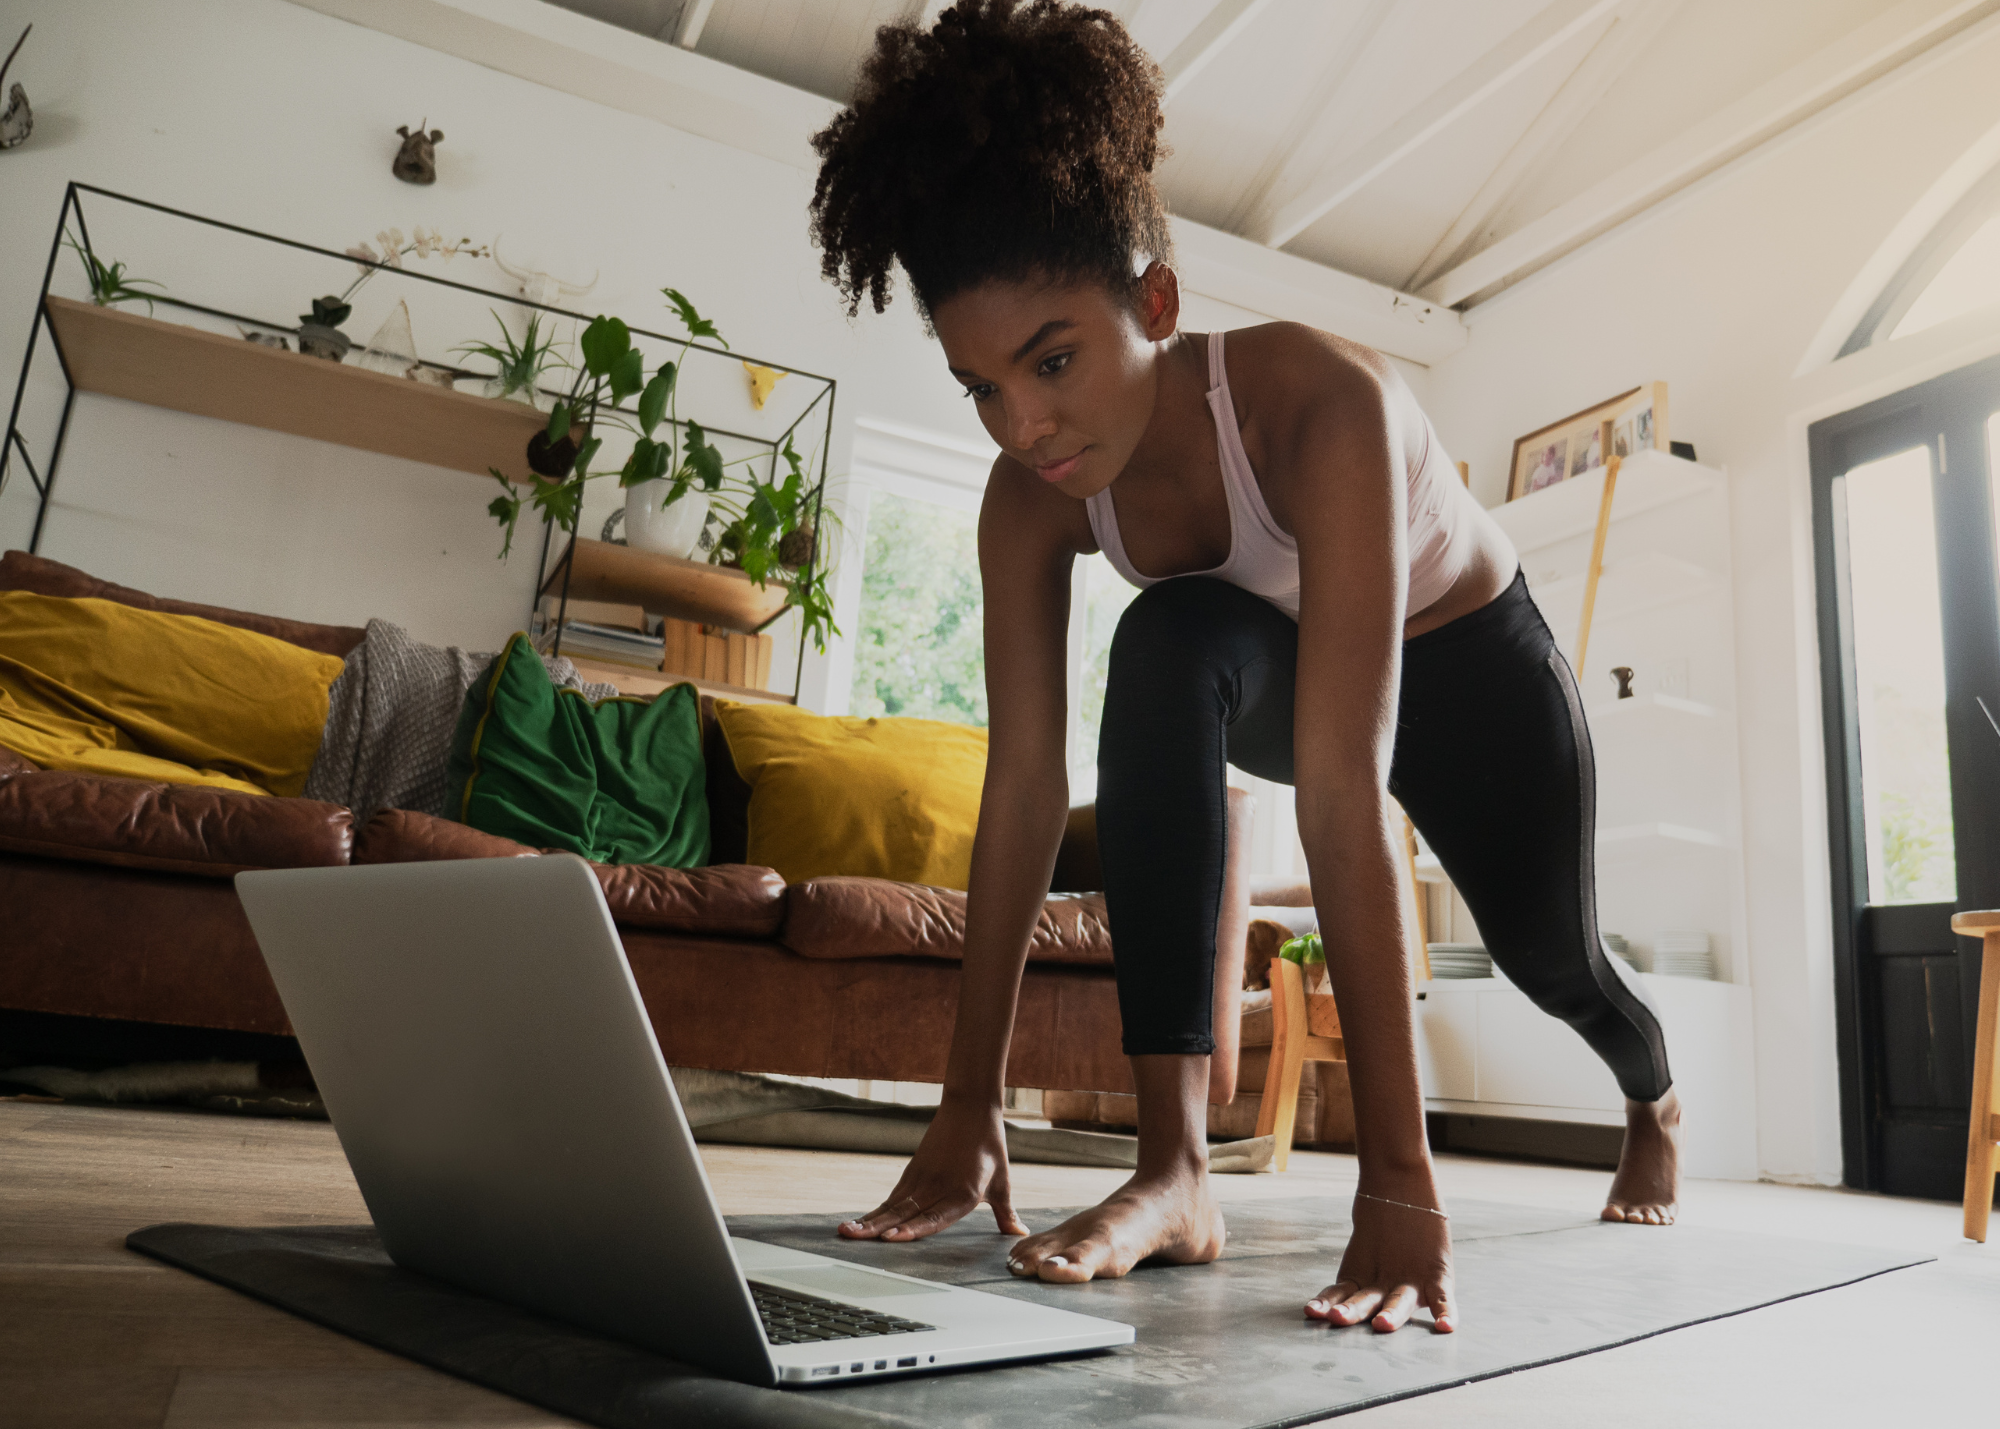 Photo of a woman stretching on a yoga mat with a laptop on the ground in front of her.